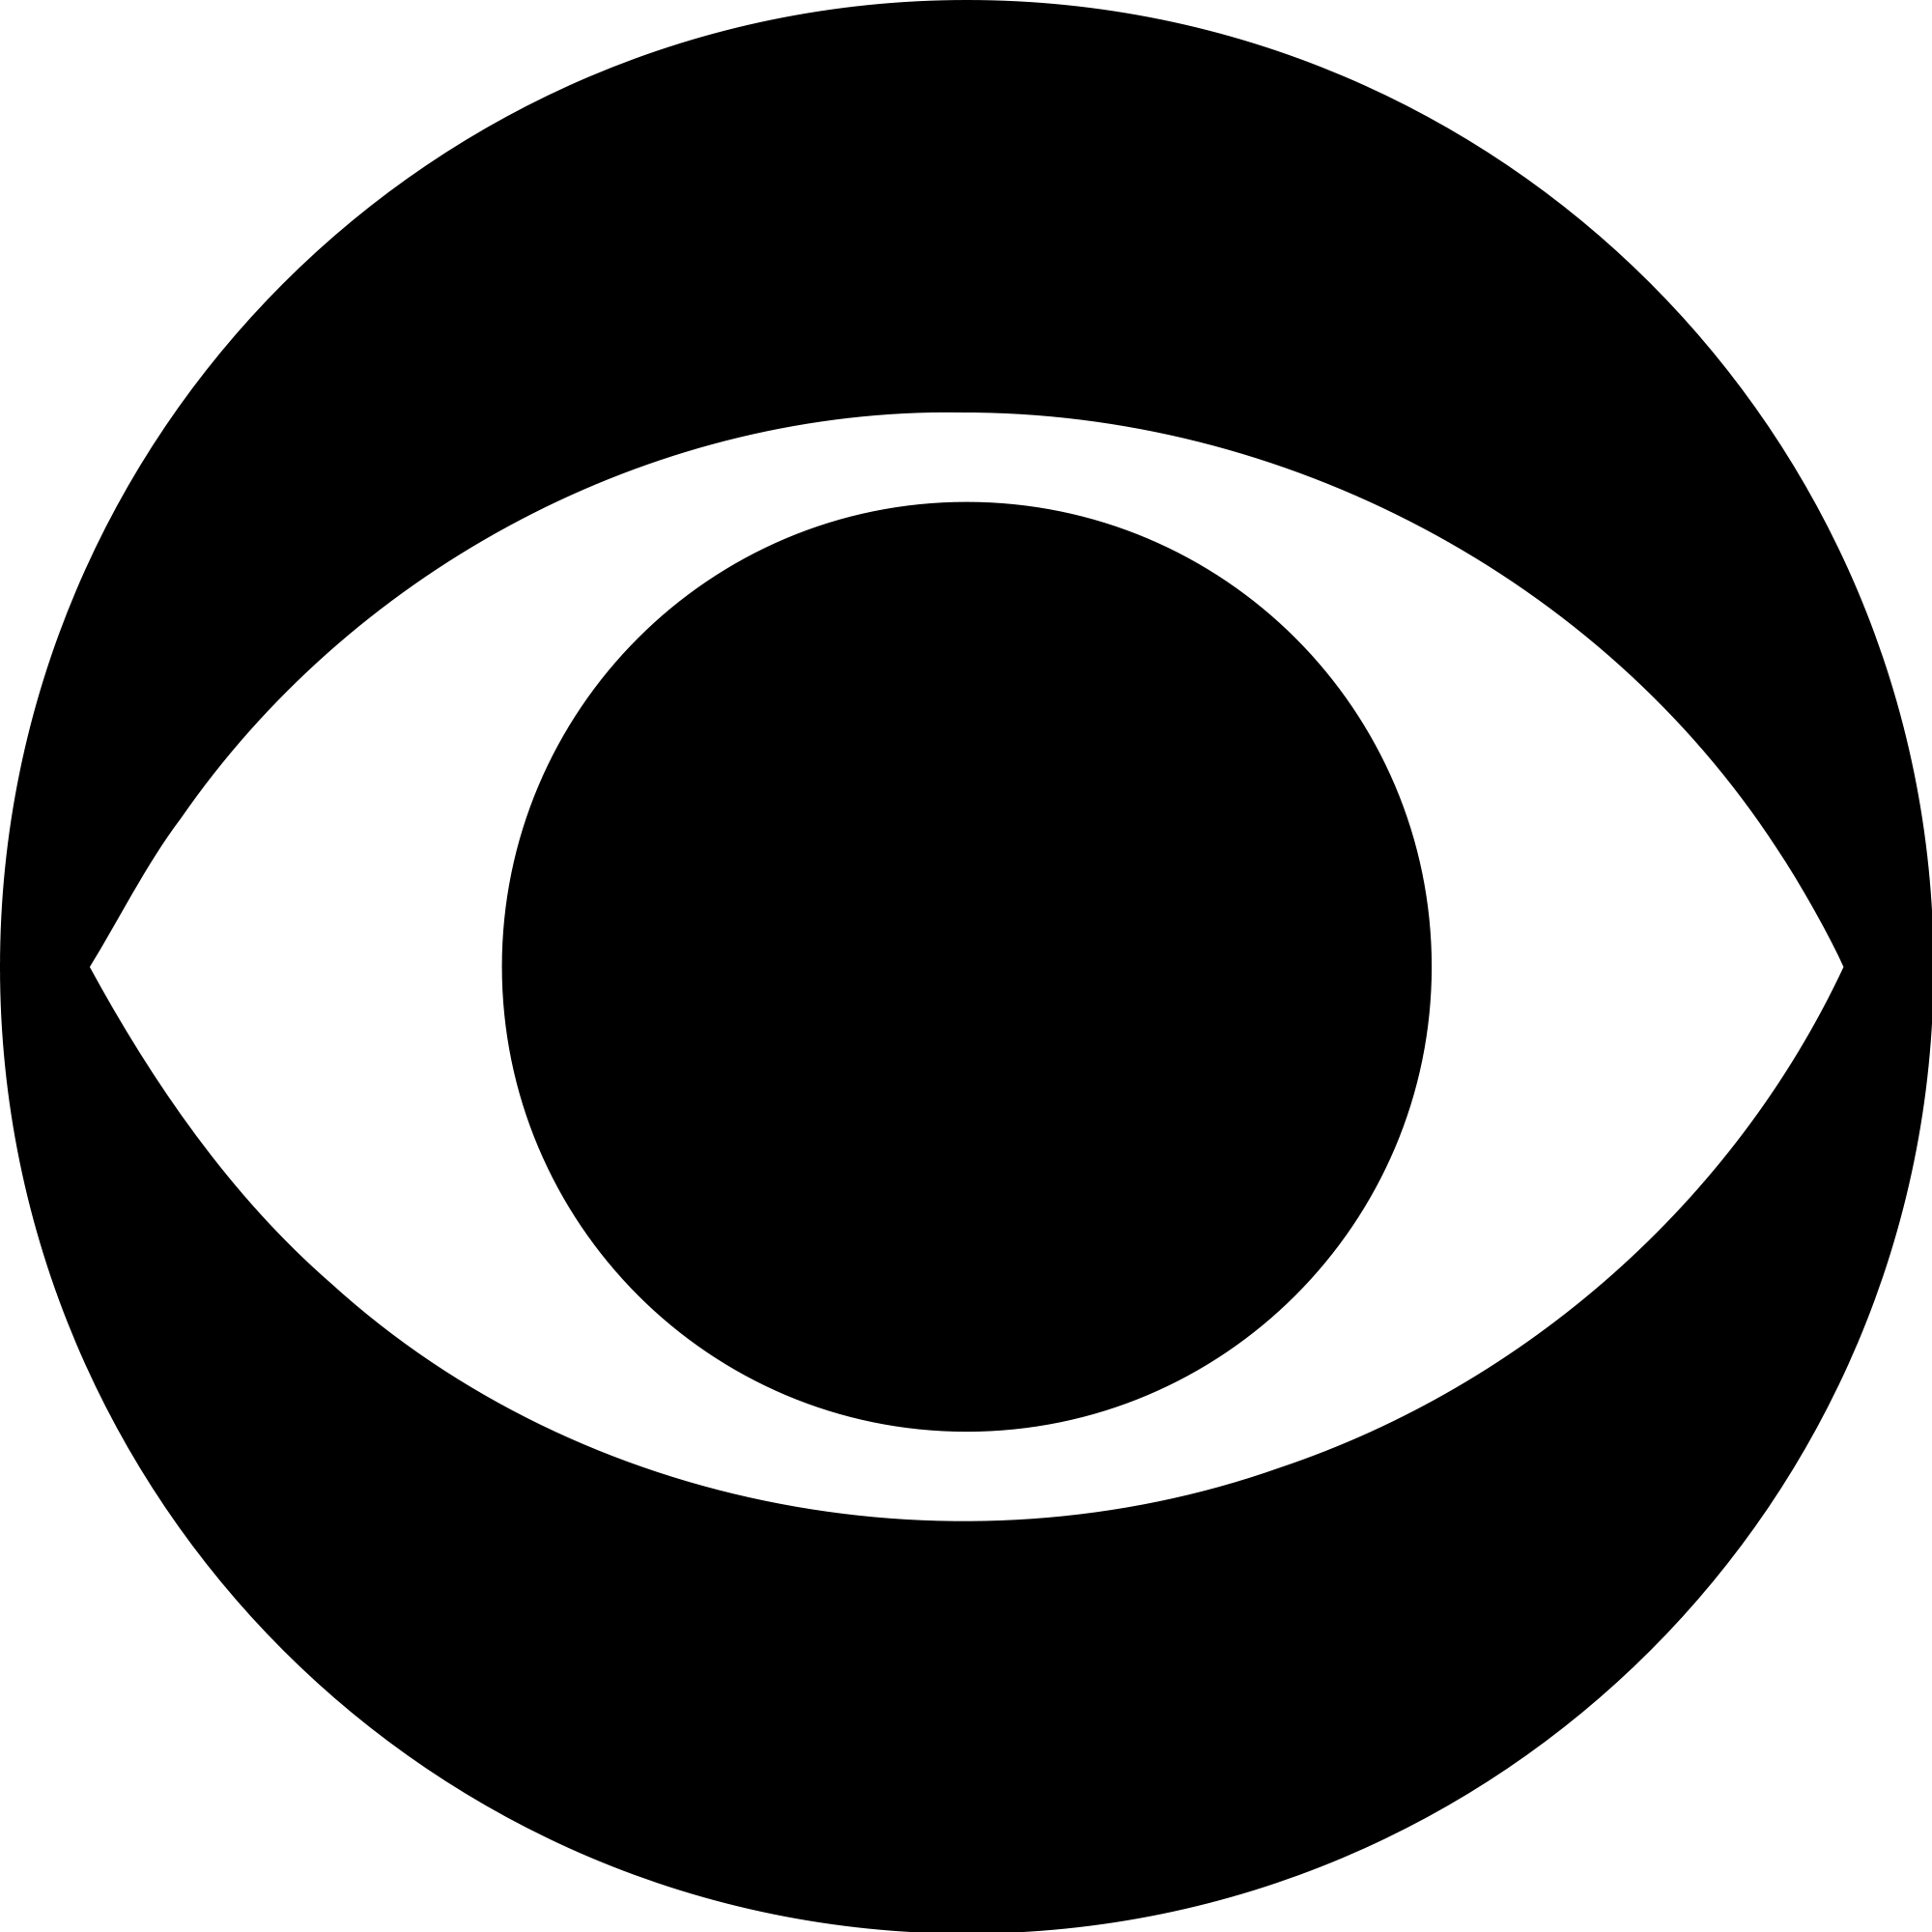 Black Eye Logo - CBS eye logo, 1951. Conceived by William Golden. Still in use today ...